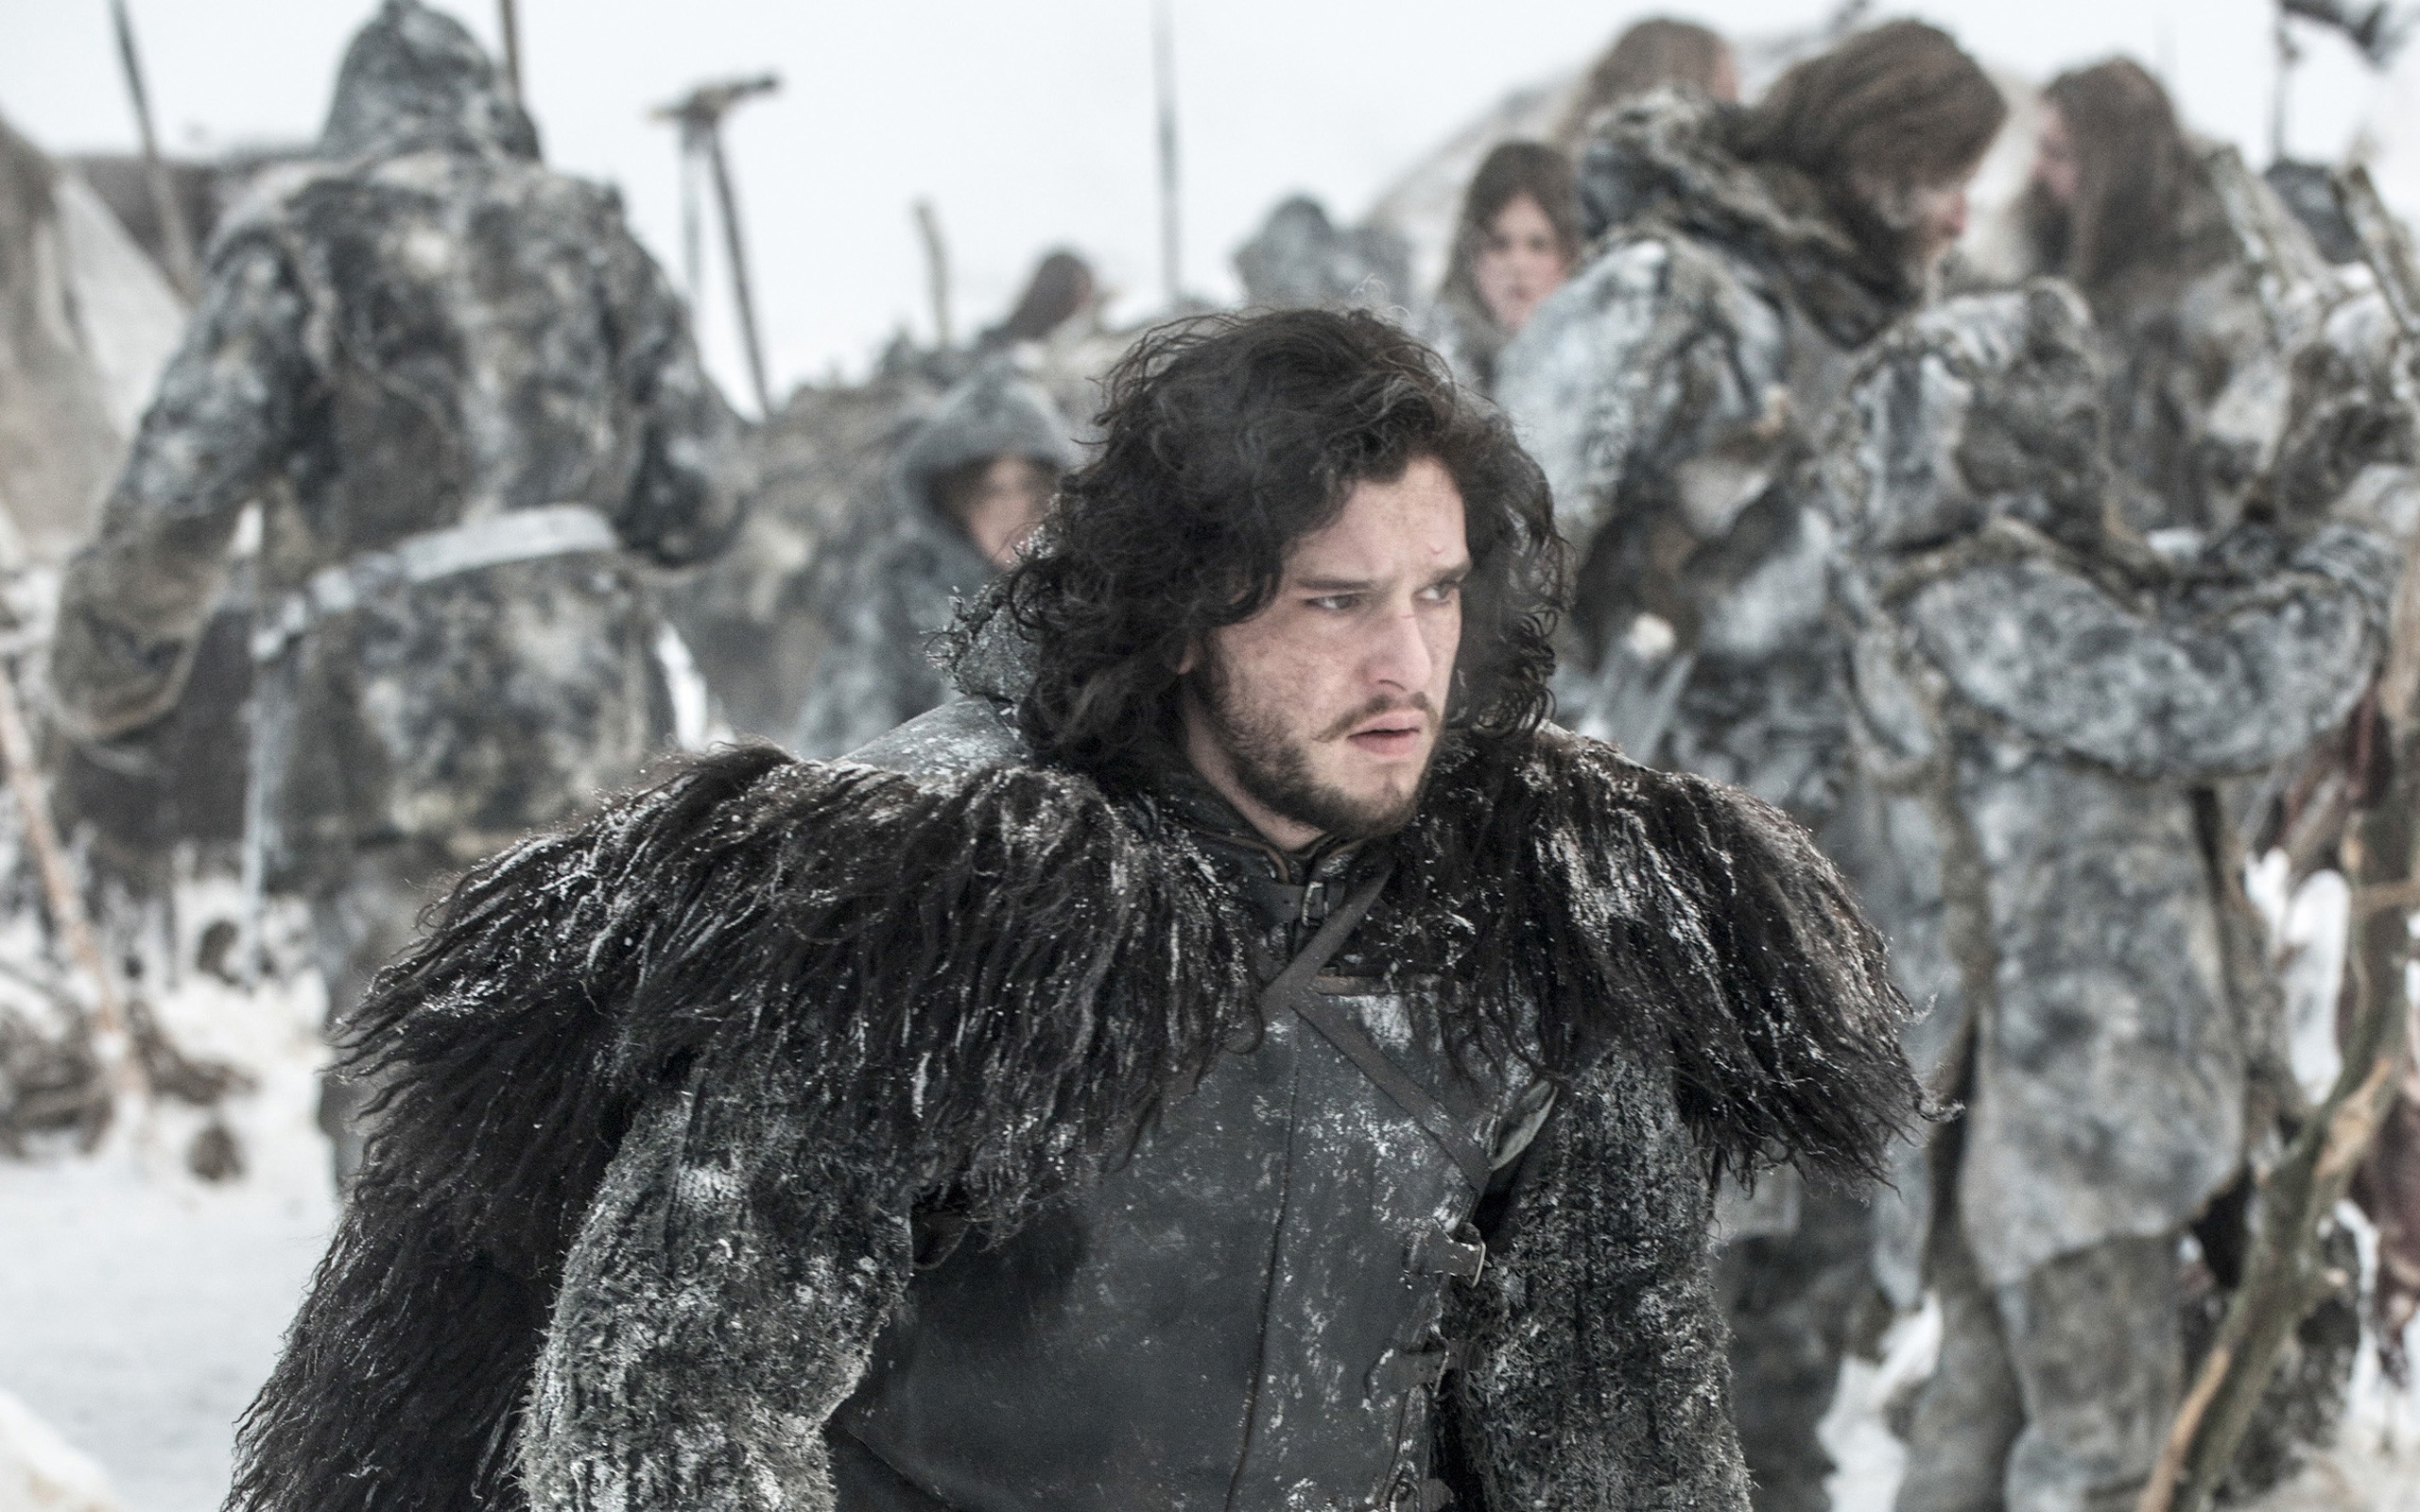 A Song of Ice and Fire: Game of Thrones 冰與火之歌：權力的遊戲高清壁紙 #37 - 2560x1600